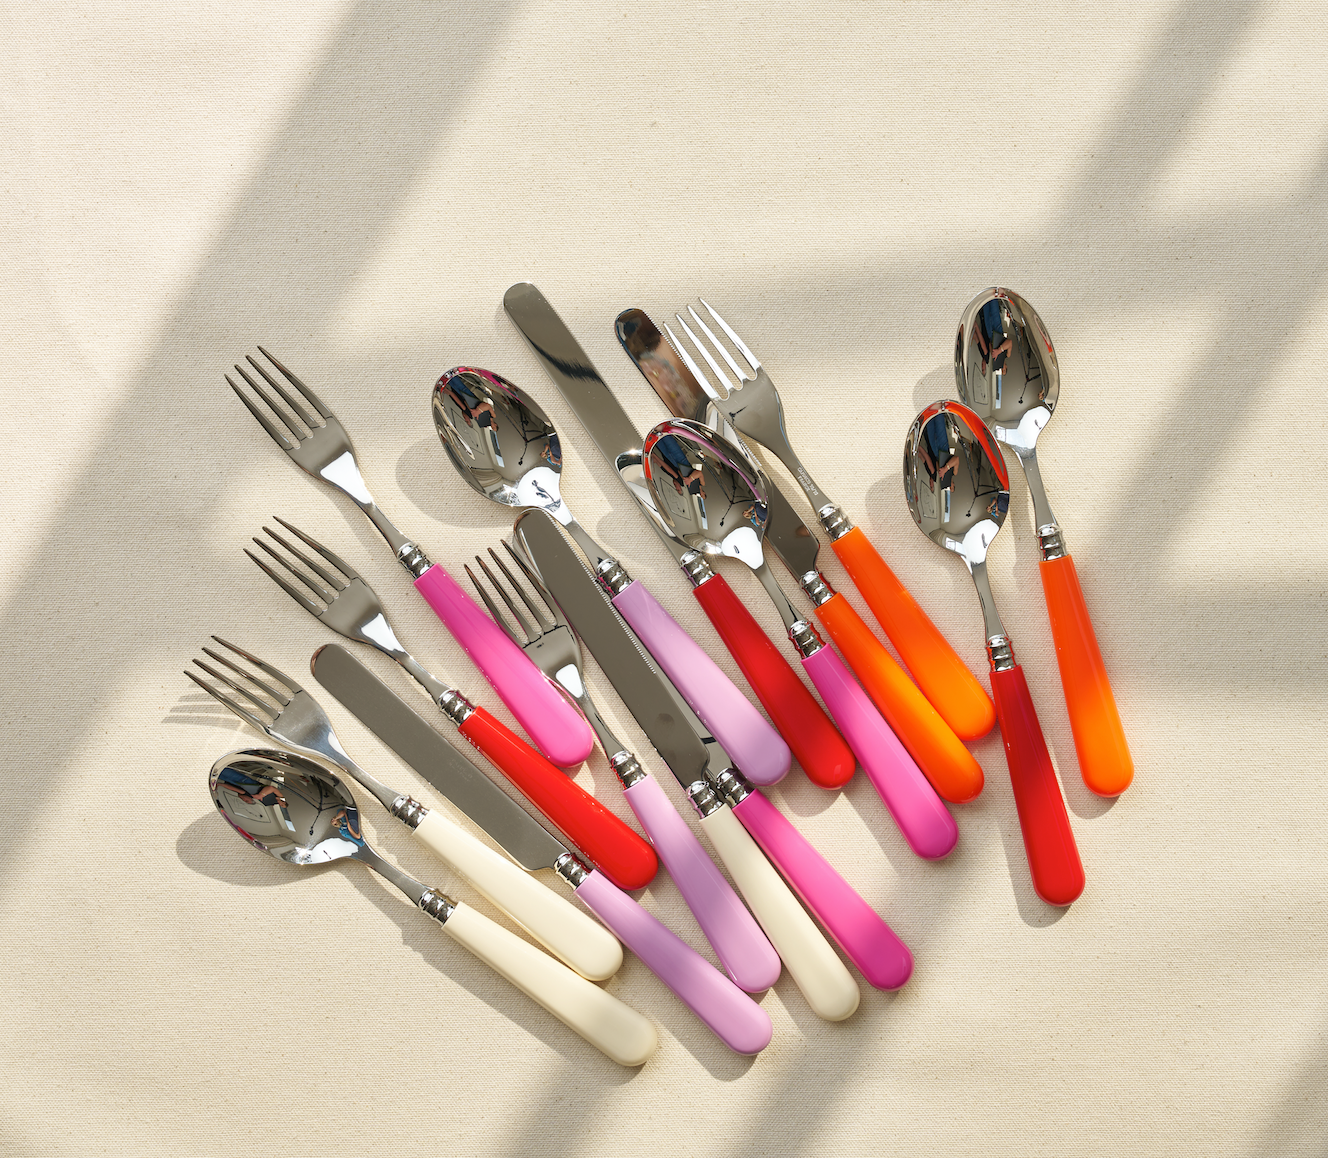 Pink Cutlery in Stainless Steel